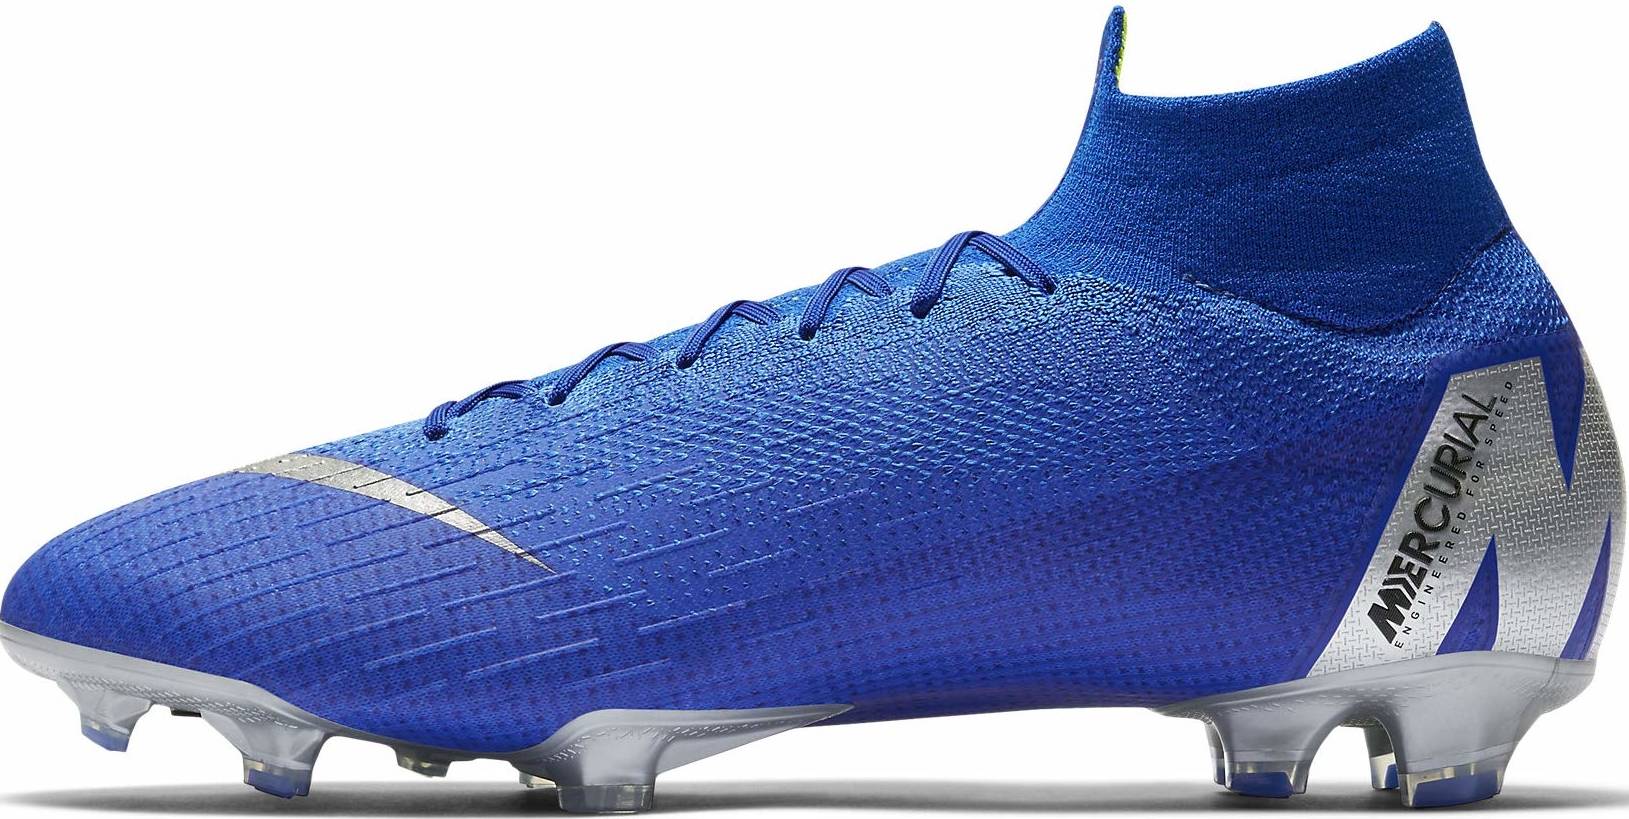 Save 48% on Blue Soccer Cleats (106 